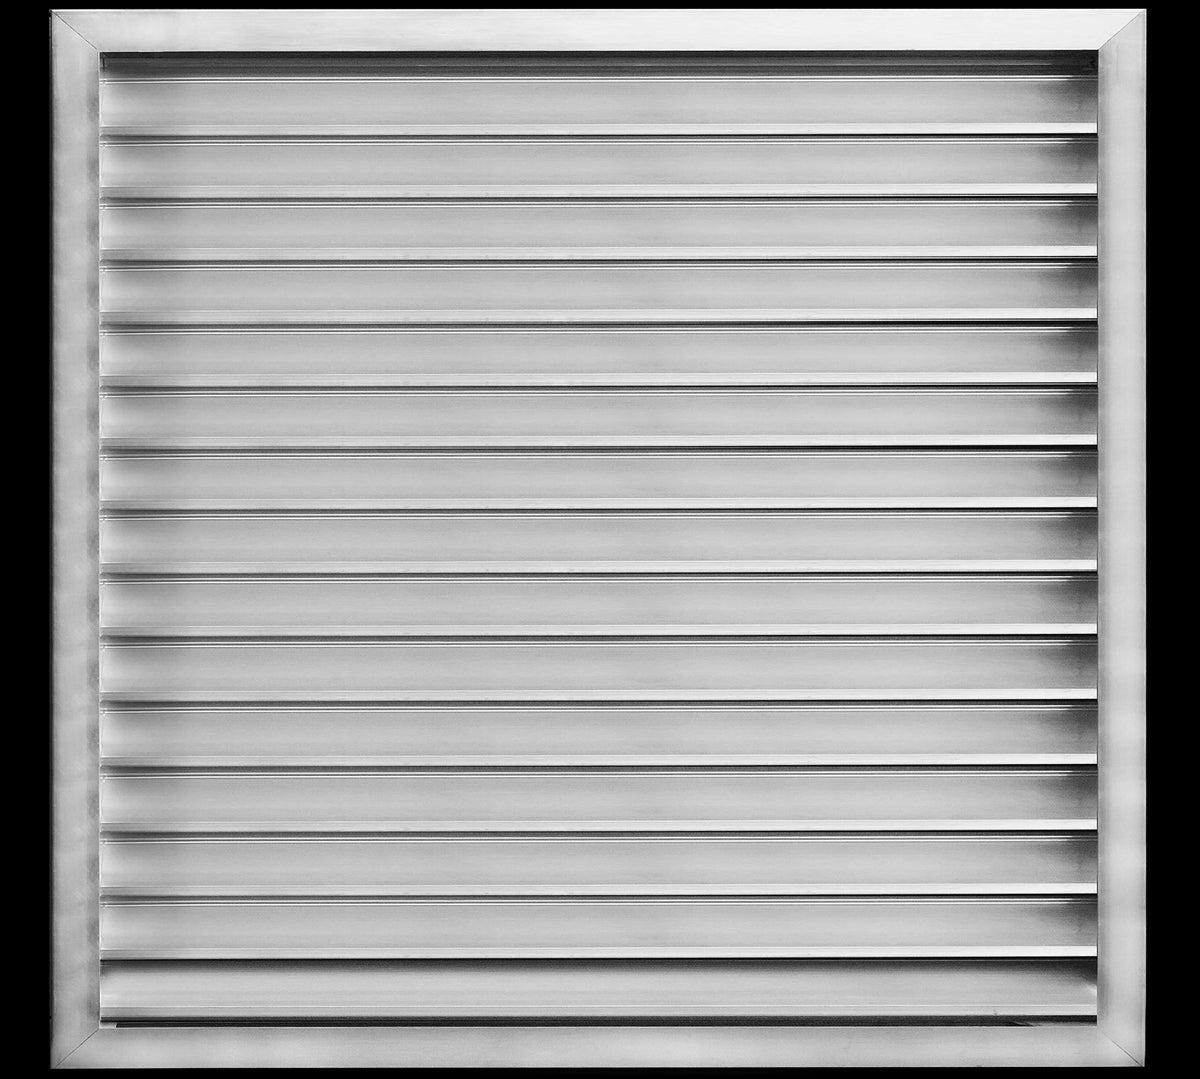 28&quot;w X 30&quot;h Aluminum Outdoor Weather Proof Louvers - Rain &amp; Waterproof Air Vent With Screen Mesh